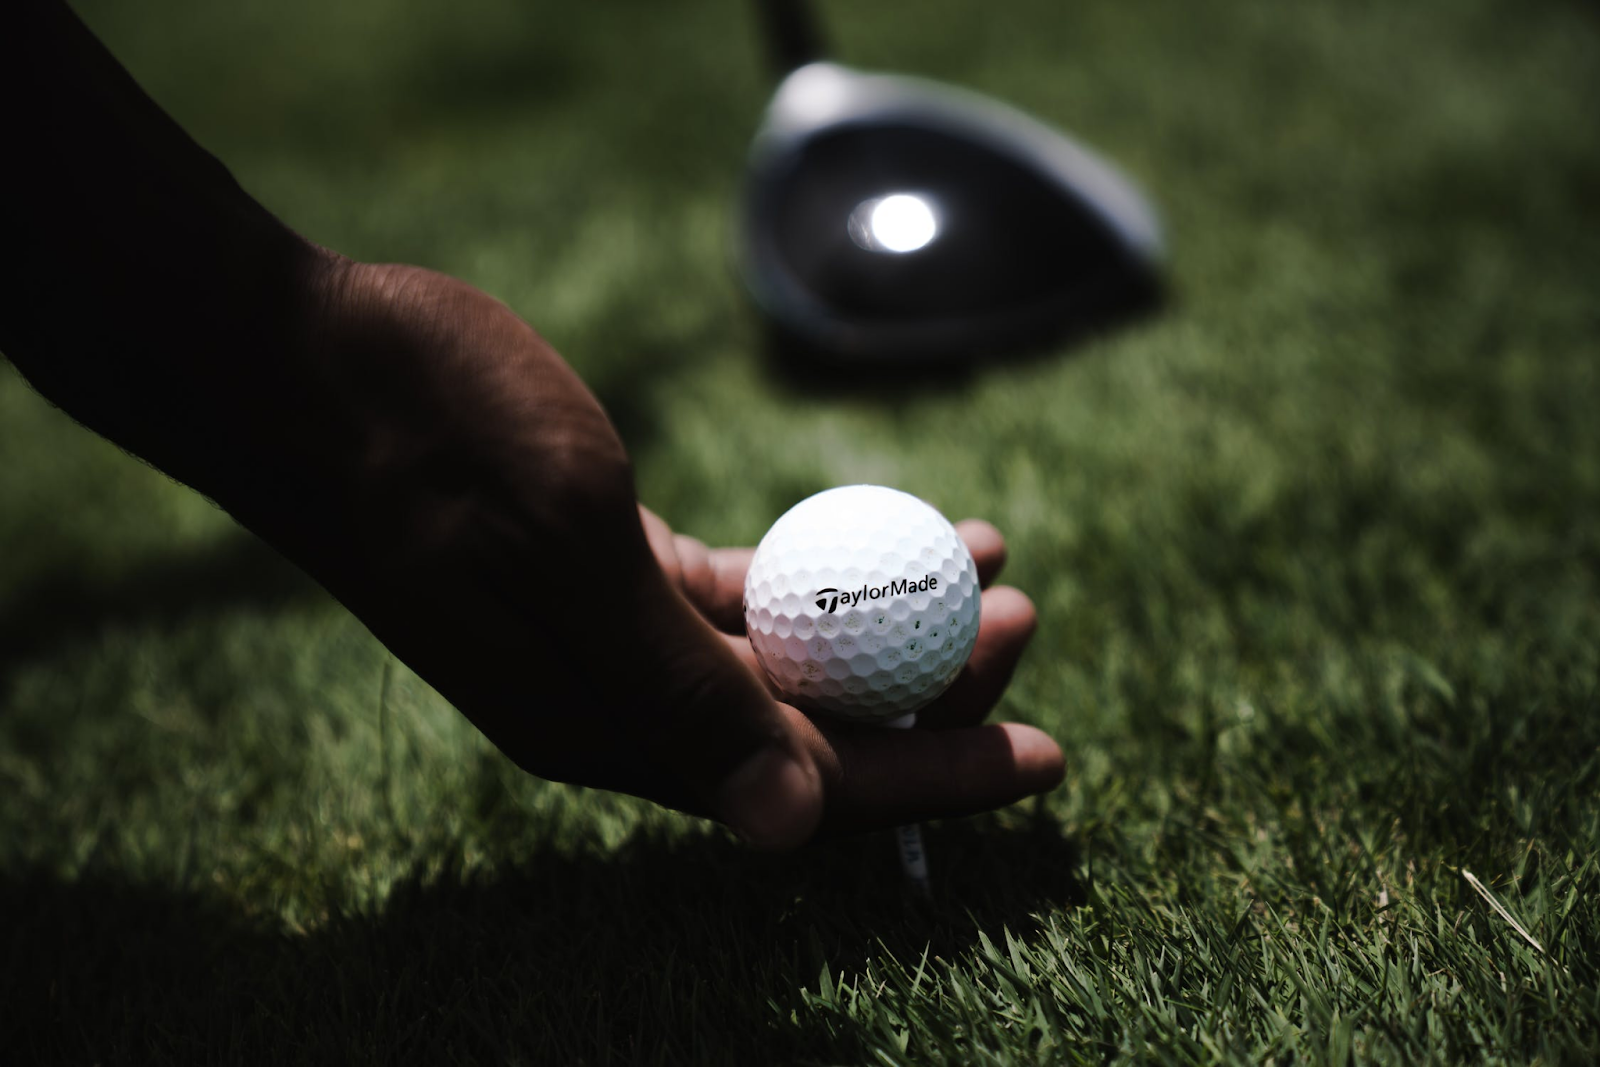 Golf Photo by Jopwell from Pexels